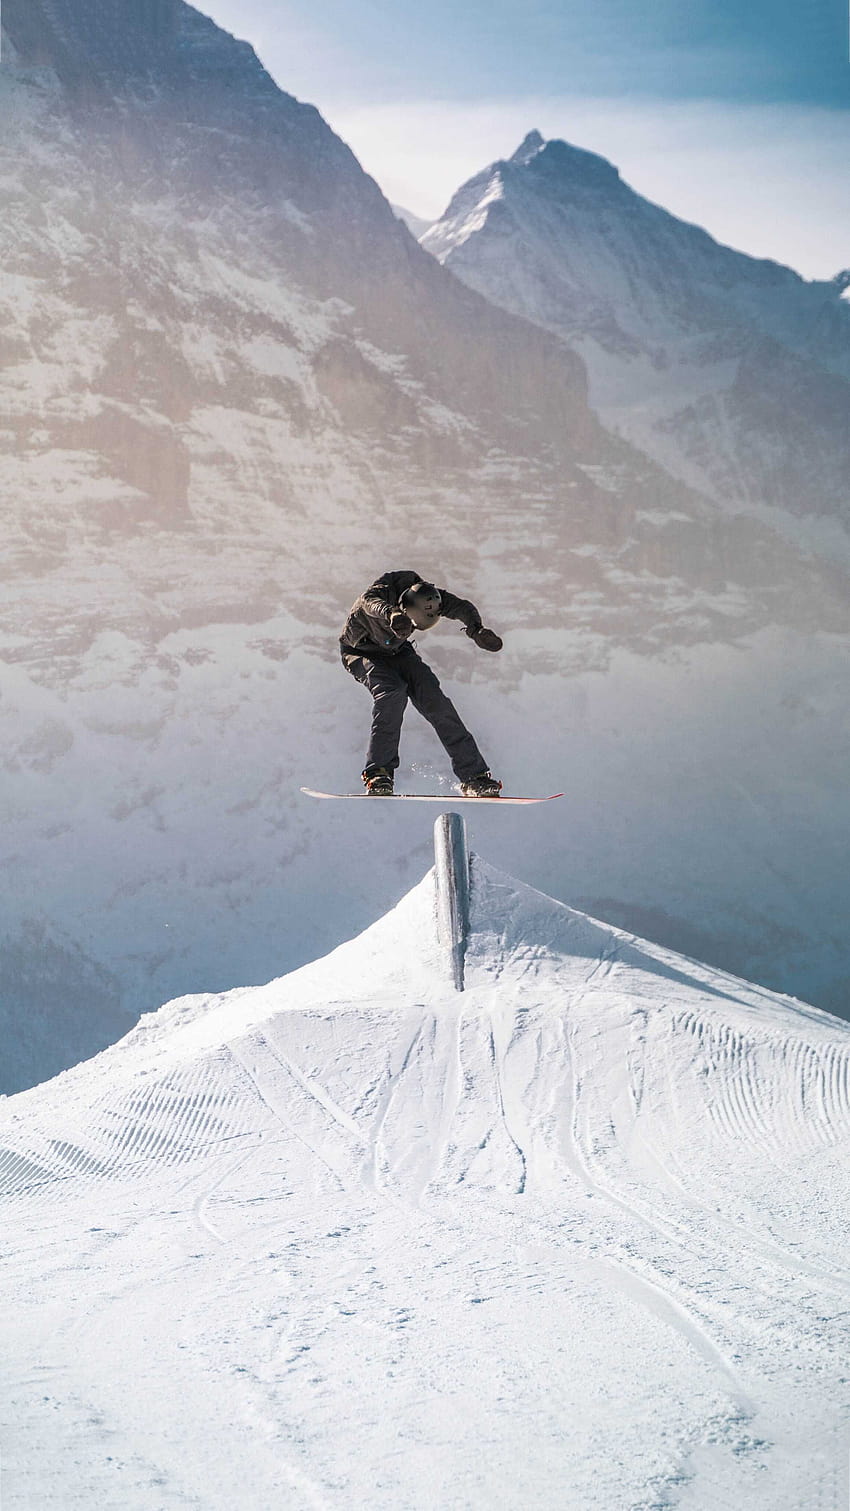 Download Snowboarding wallpapers for mobile phone free Snowboarding HD  pictures